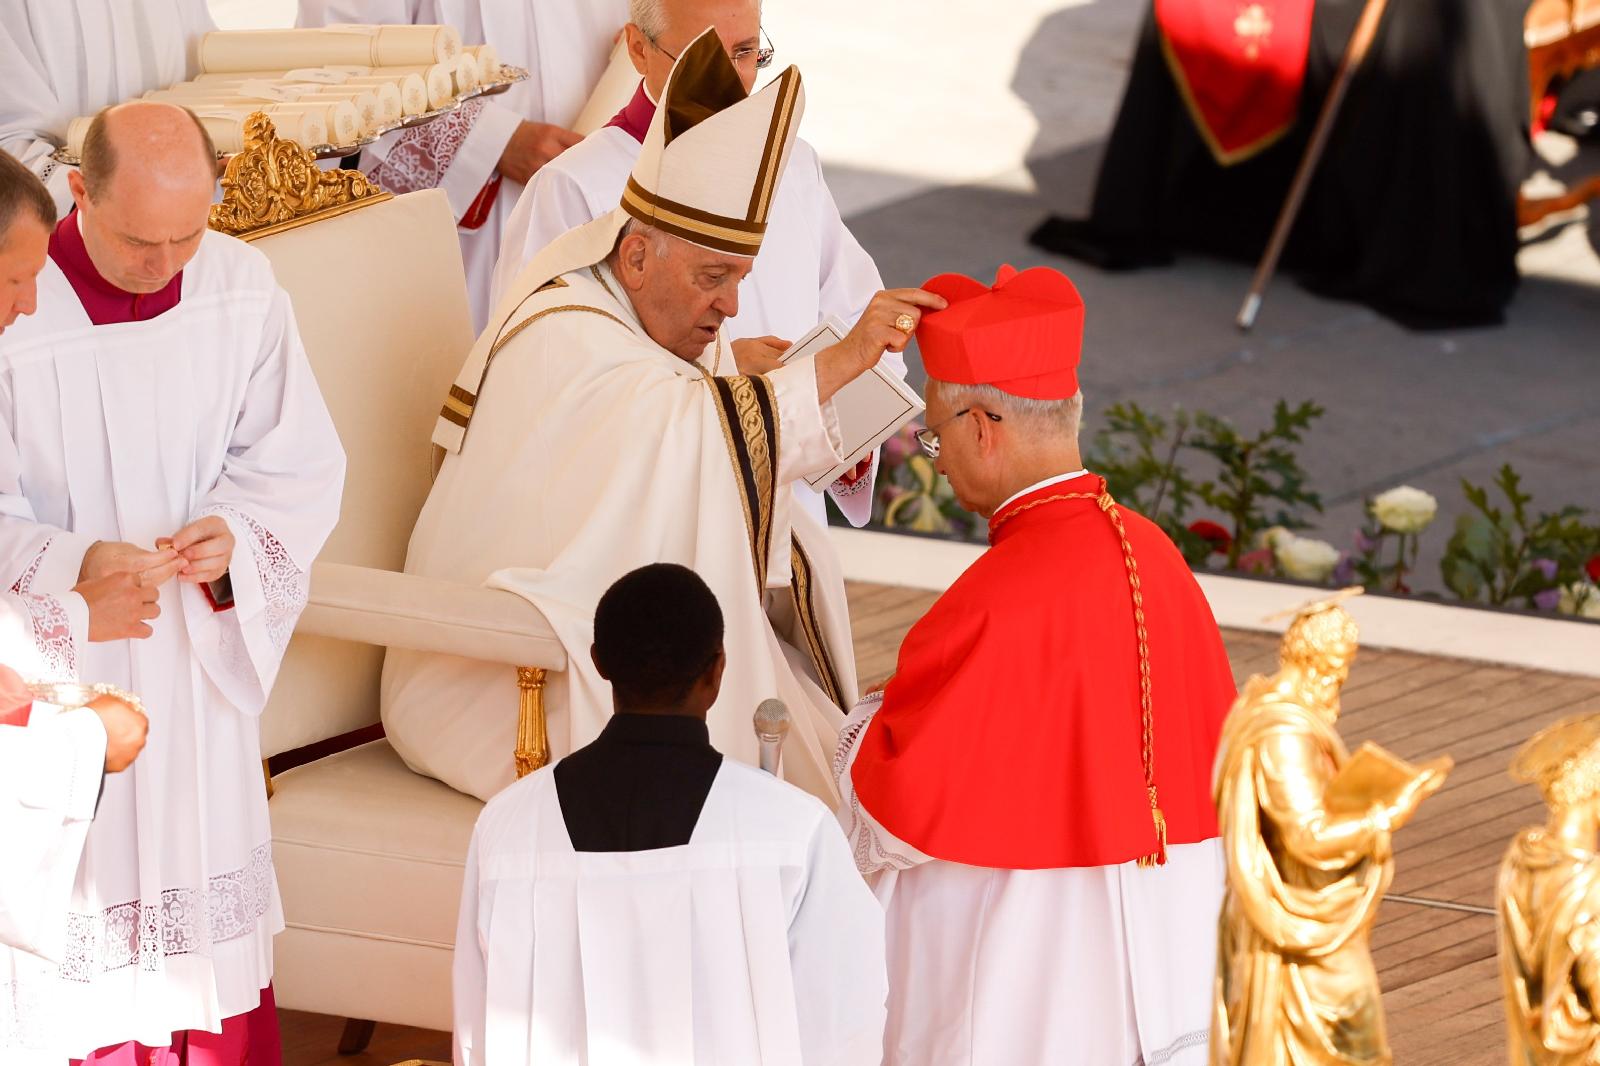 Pope Francis and Cardinal Prevost